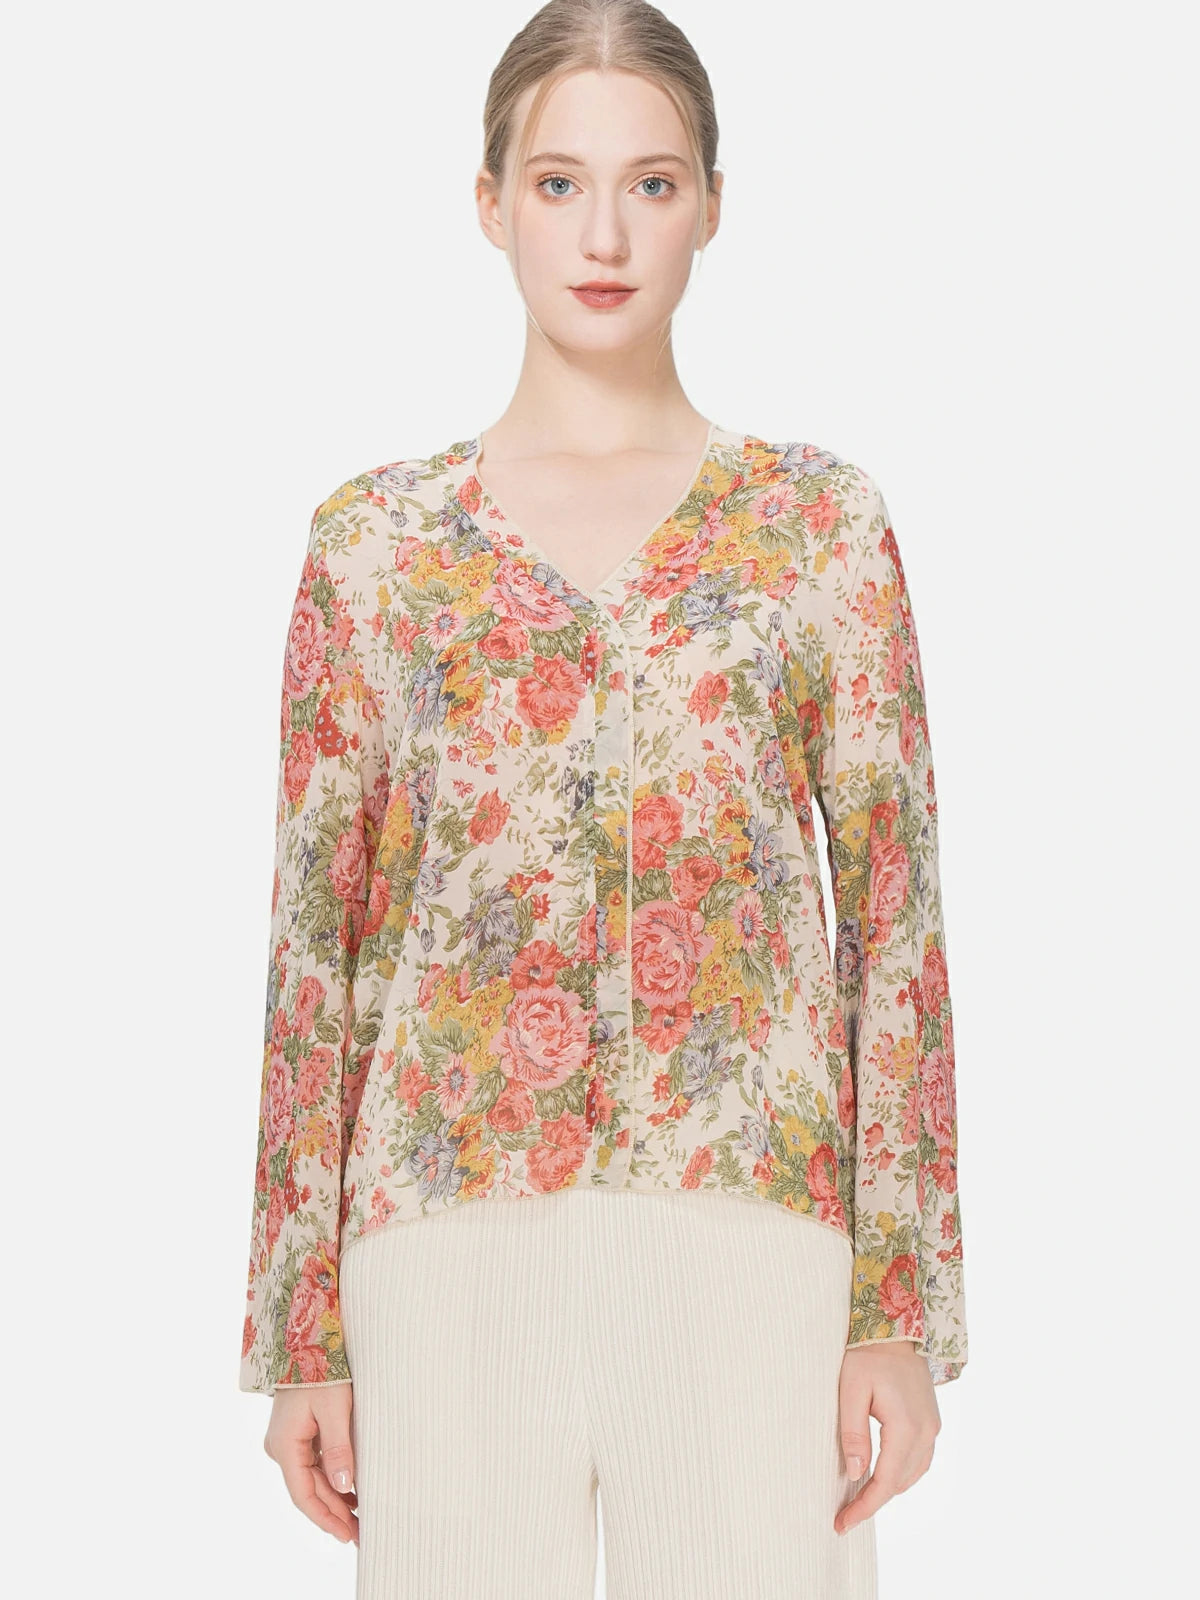 Lightweight Bohemian blouse with floral print and V-neck design, creating an ethereal and feminine look suitable for a romantic and casual fashion statement.